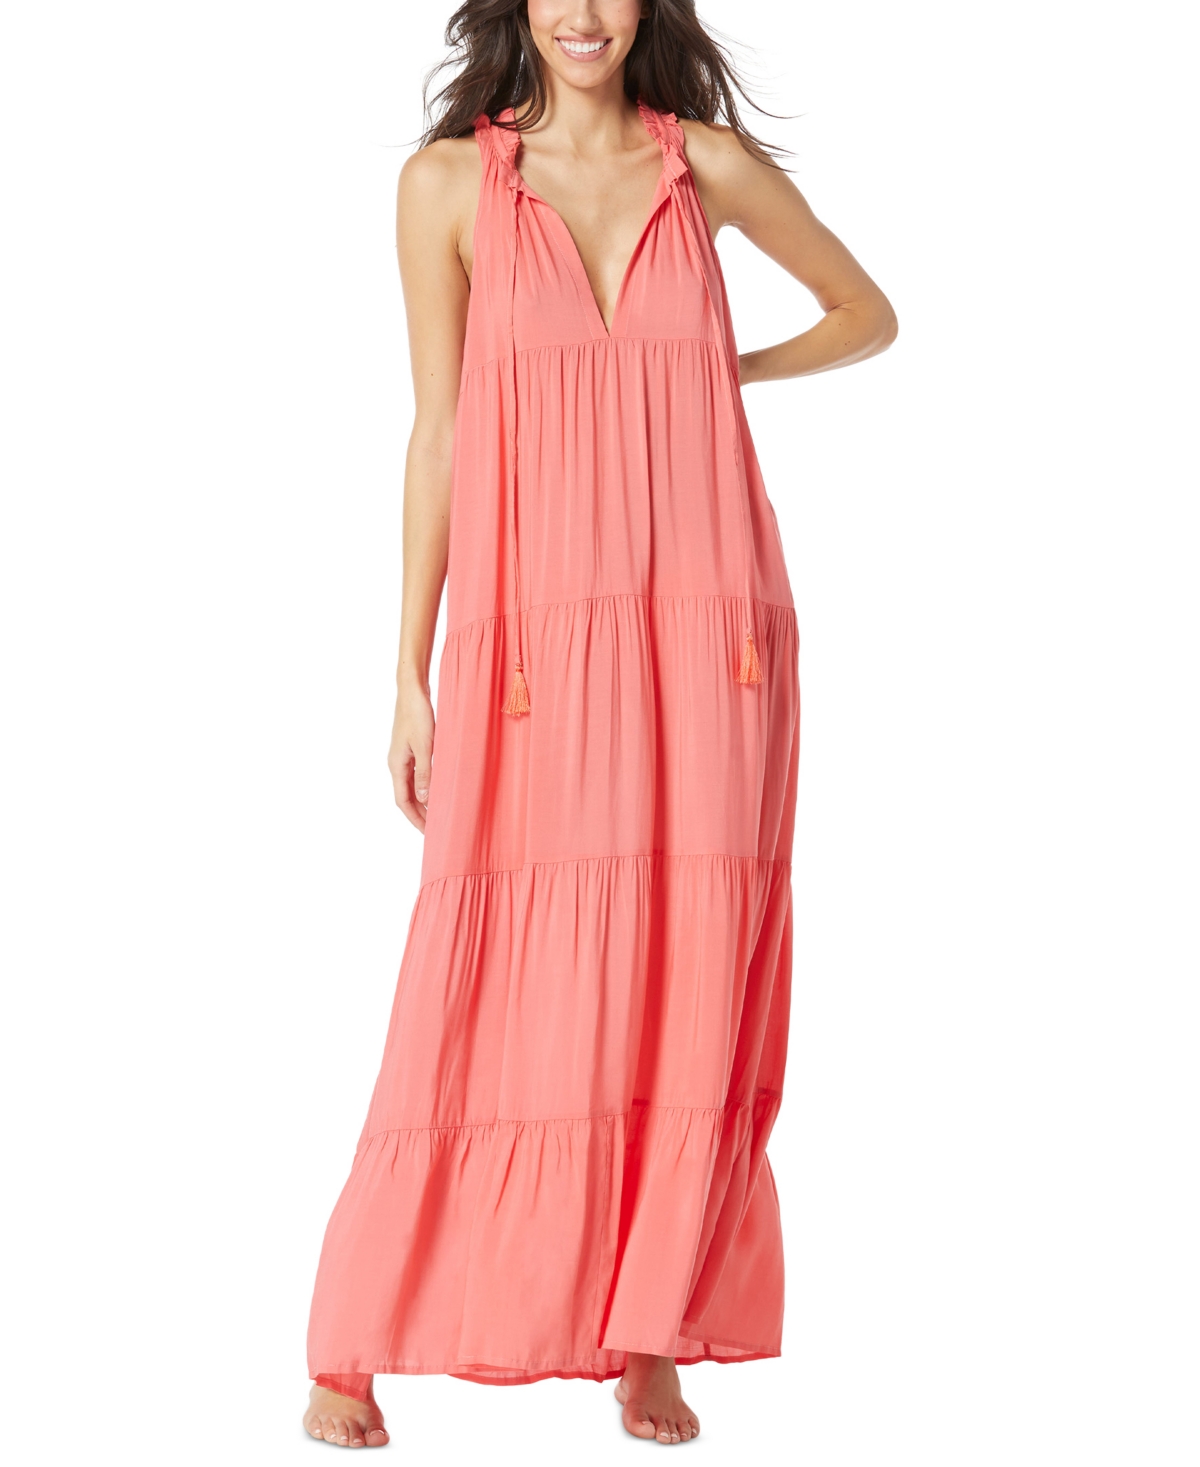 Women's Tiered Maxi Dress Swim Cover-Up - Pop Coral